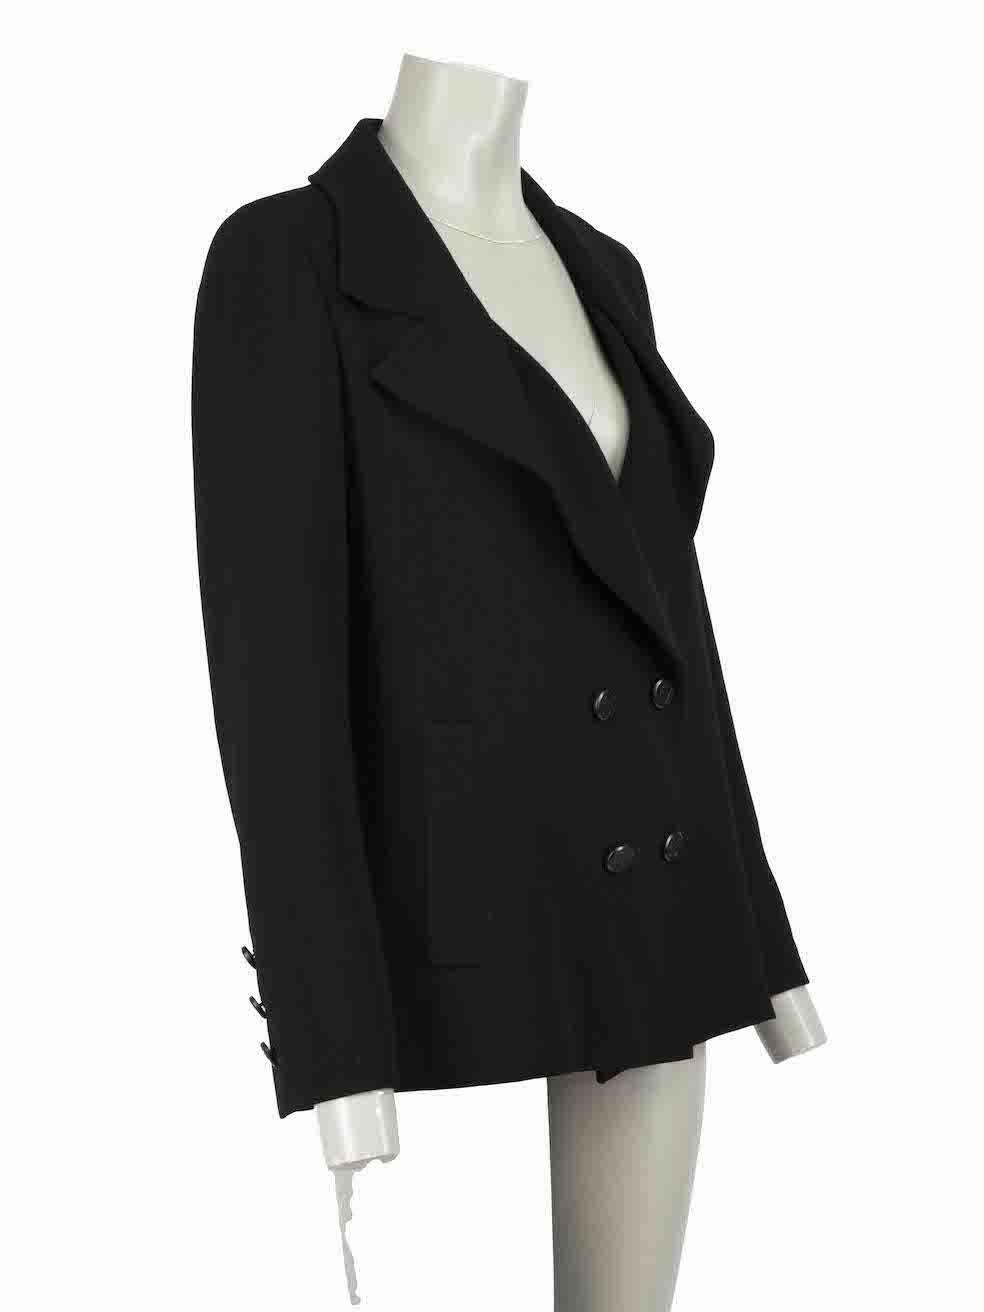 CONDITION is Very good. Hardly any visible wear to blazer is evident on this used Chanel designer resale item.

Details
Black
Wool
Oversized blazer
Double breasted
CC logo buttons
Buttoned cuffs
2x Front side pockets
Shoulder padded

Made in